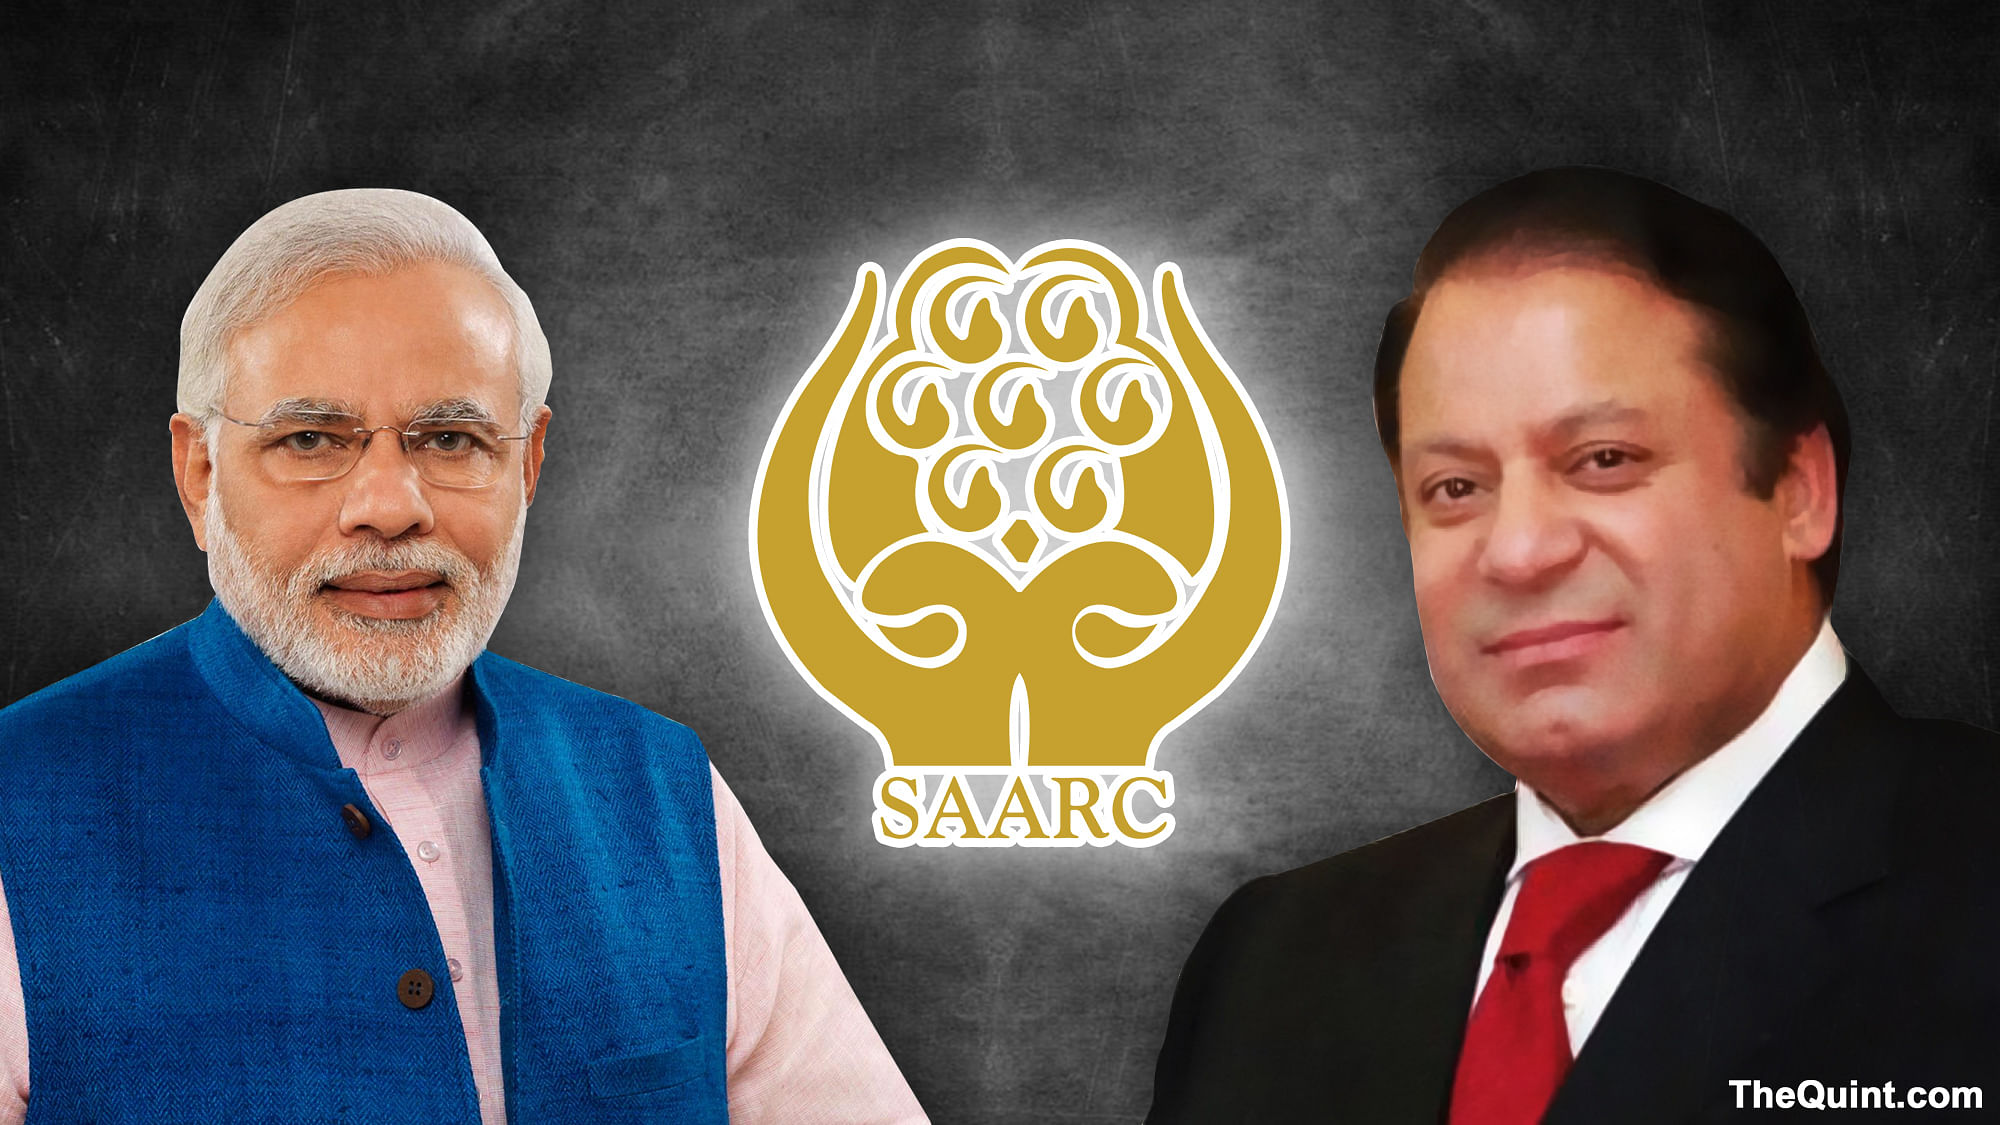 

MEA announced that PM Modi will be skipping the SAARC summit. (Photo: The Quint)